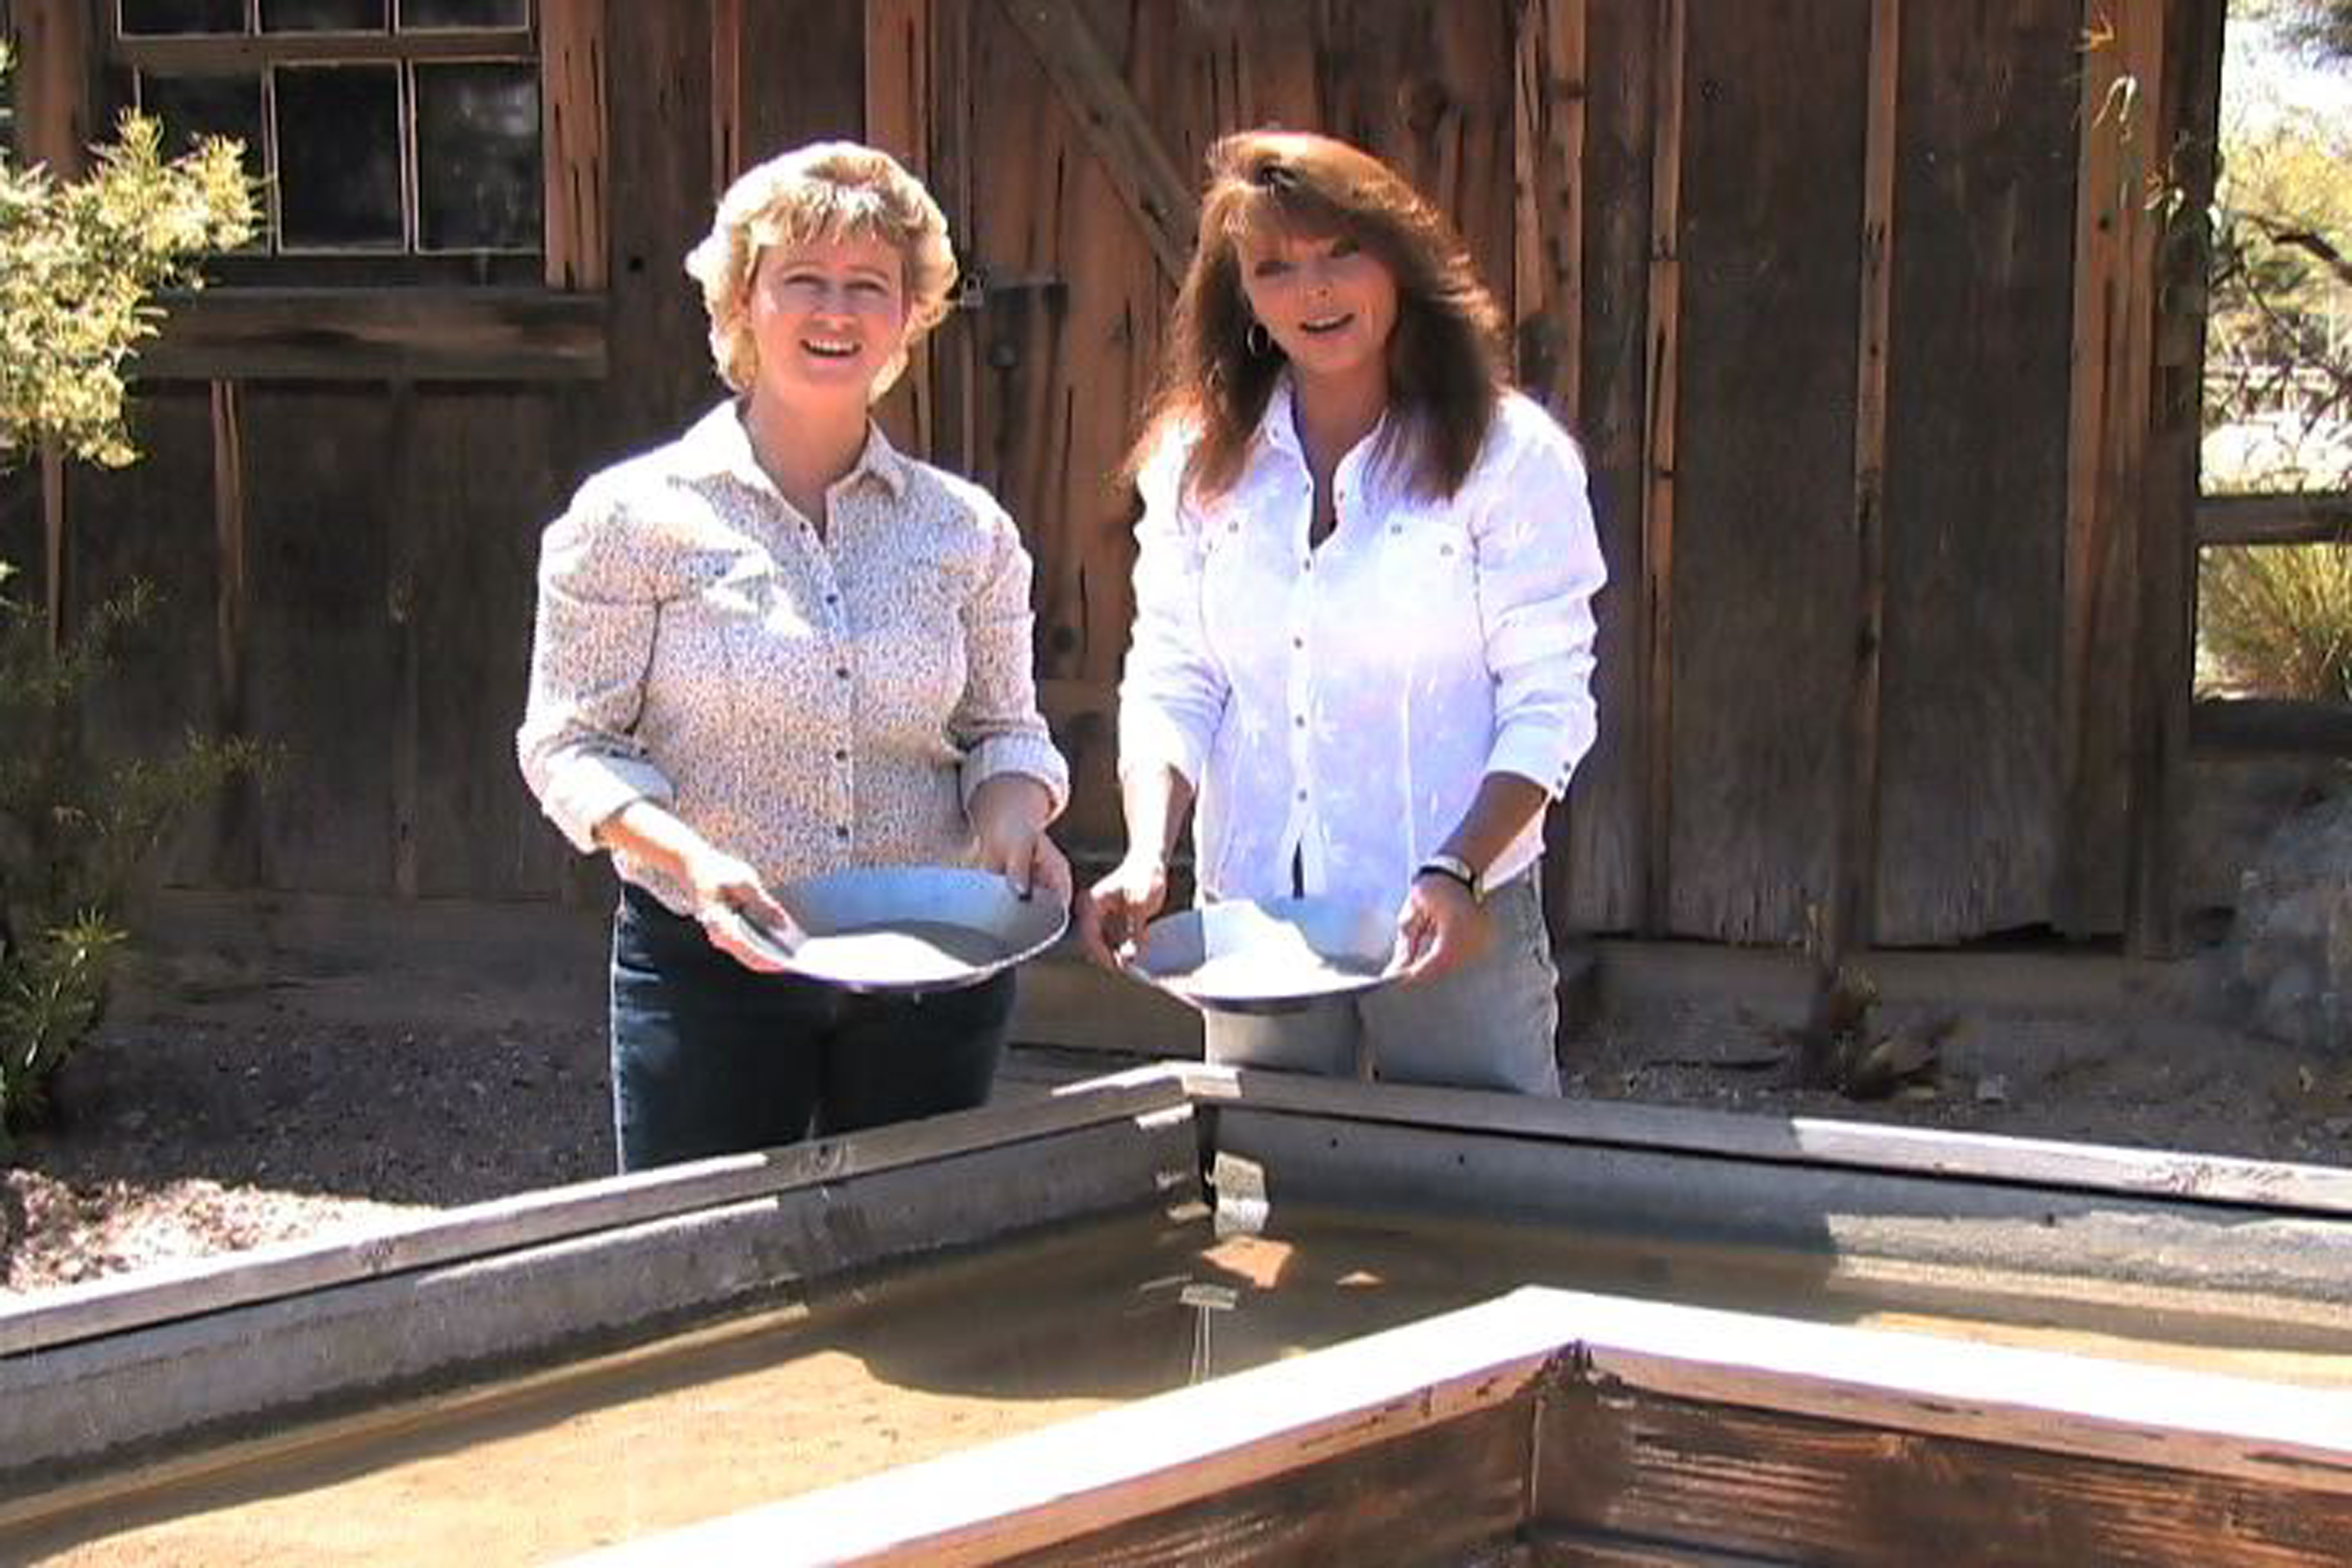 Left to Right: Tracy Wright and Nancy Criss From the set of ON THE ROAD WEEKLY at Old Tucson Studios.